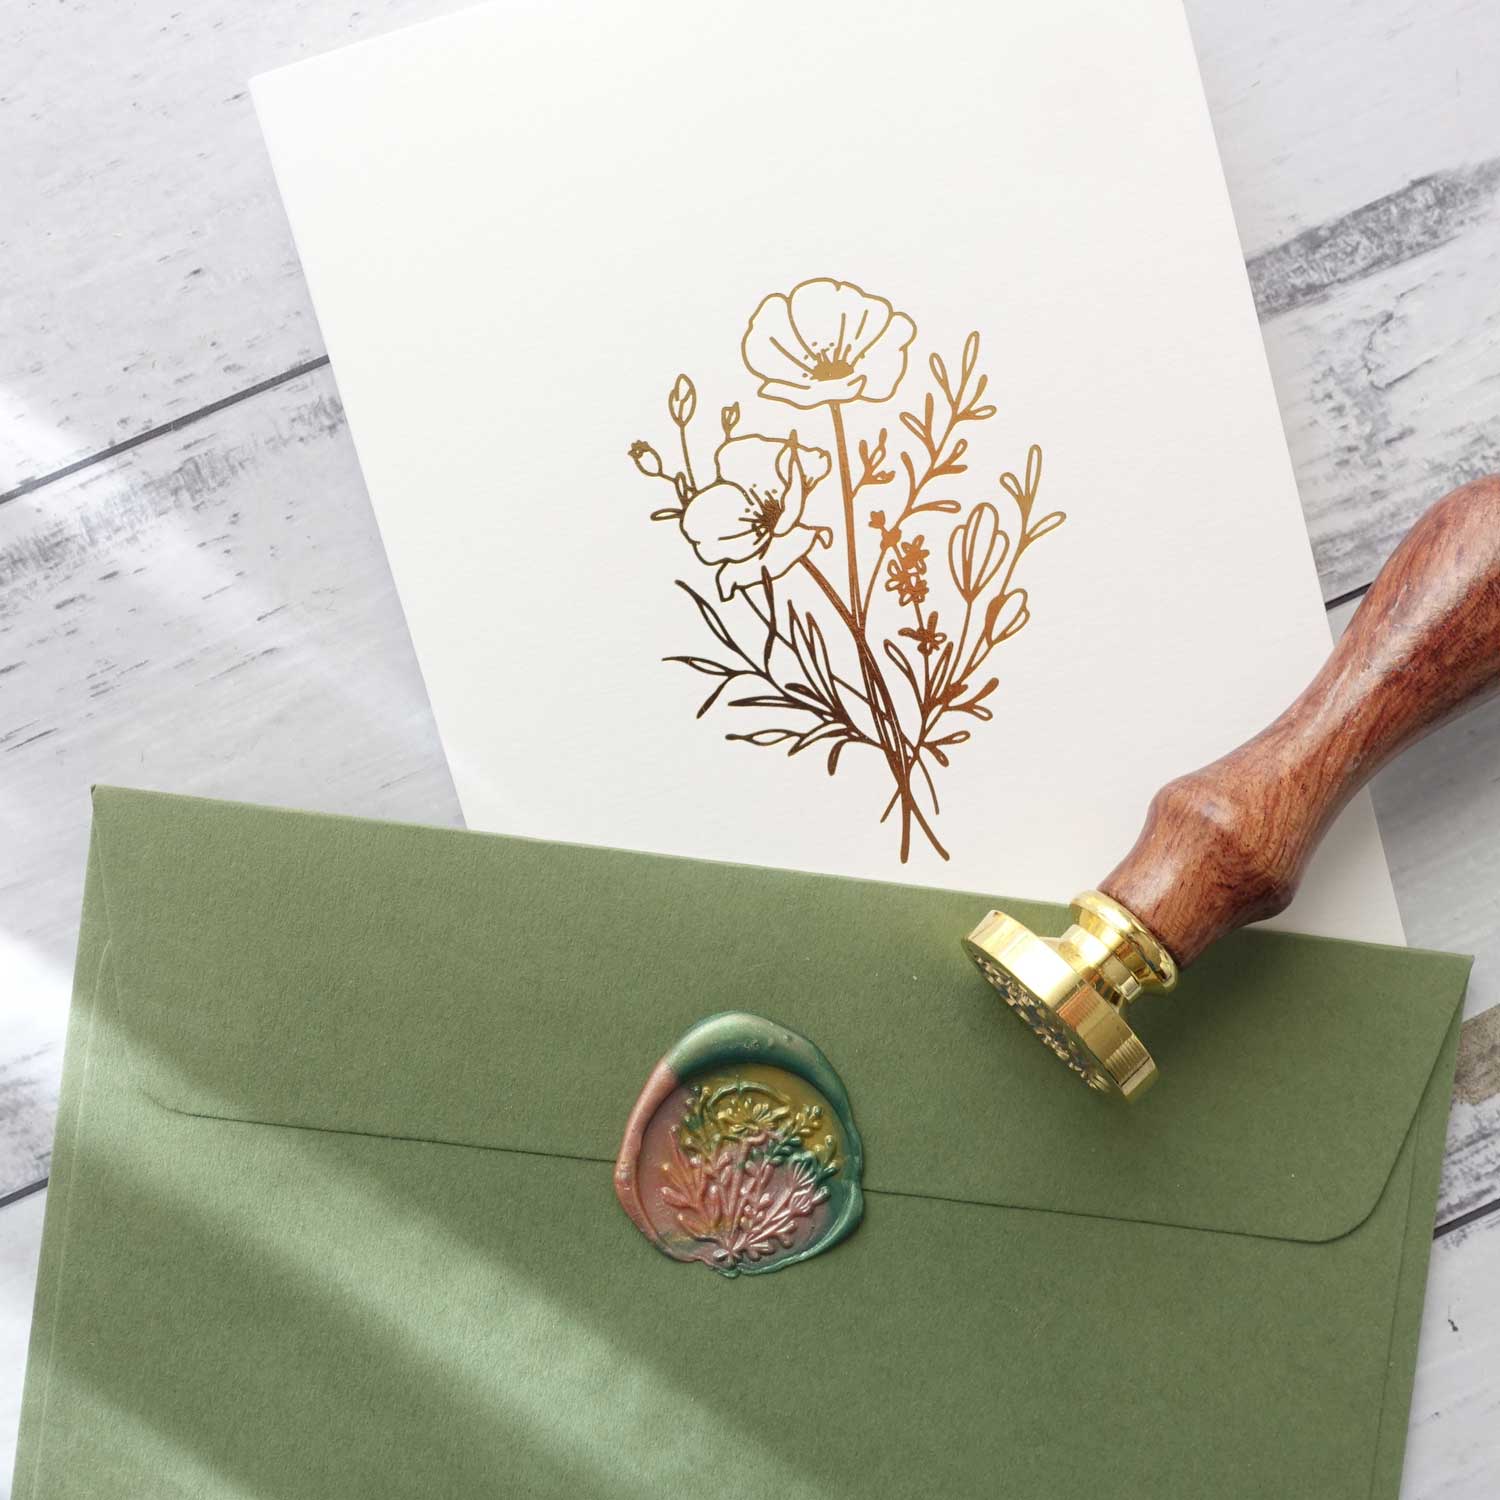 Gold foiled greeting card with wild flower wax seal stamp on green envelope